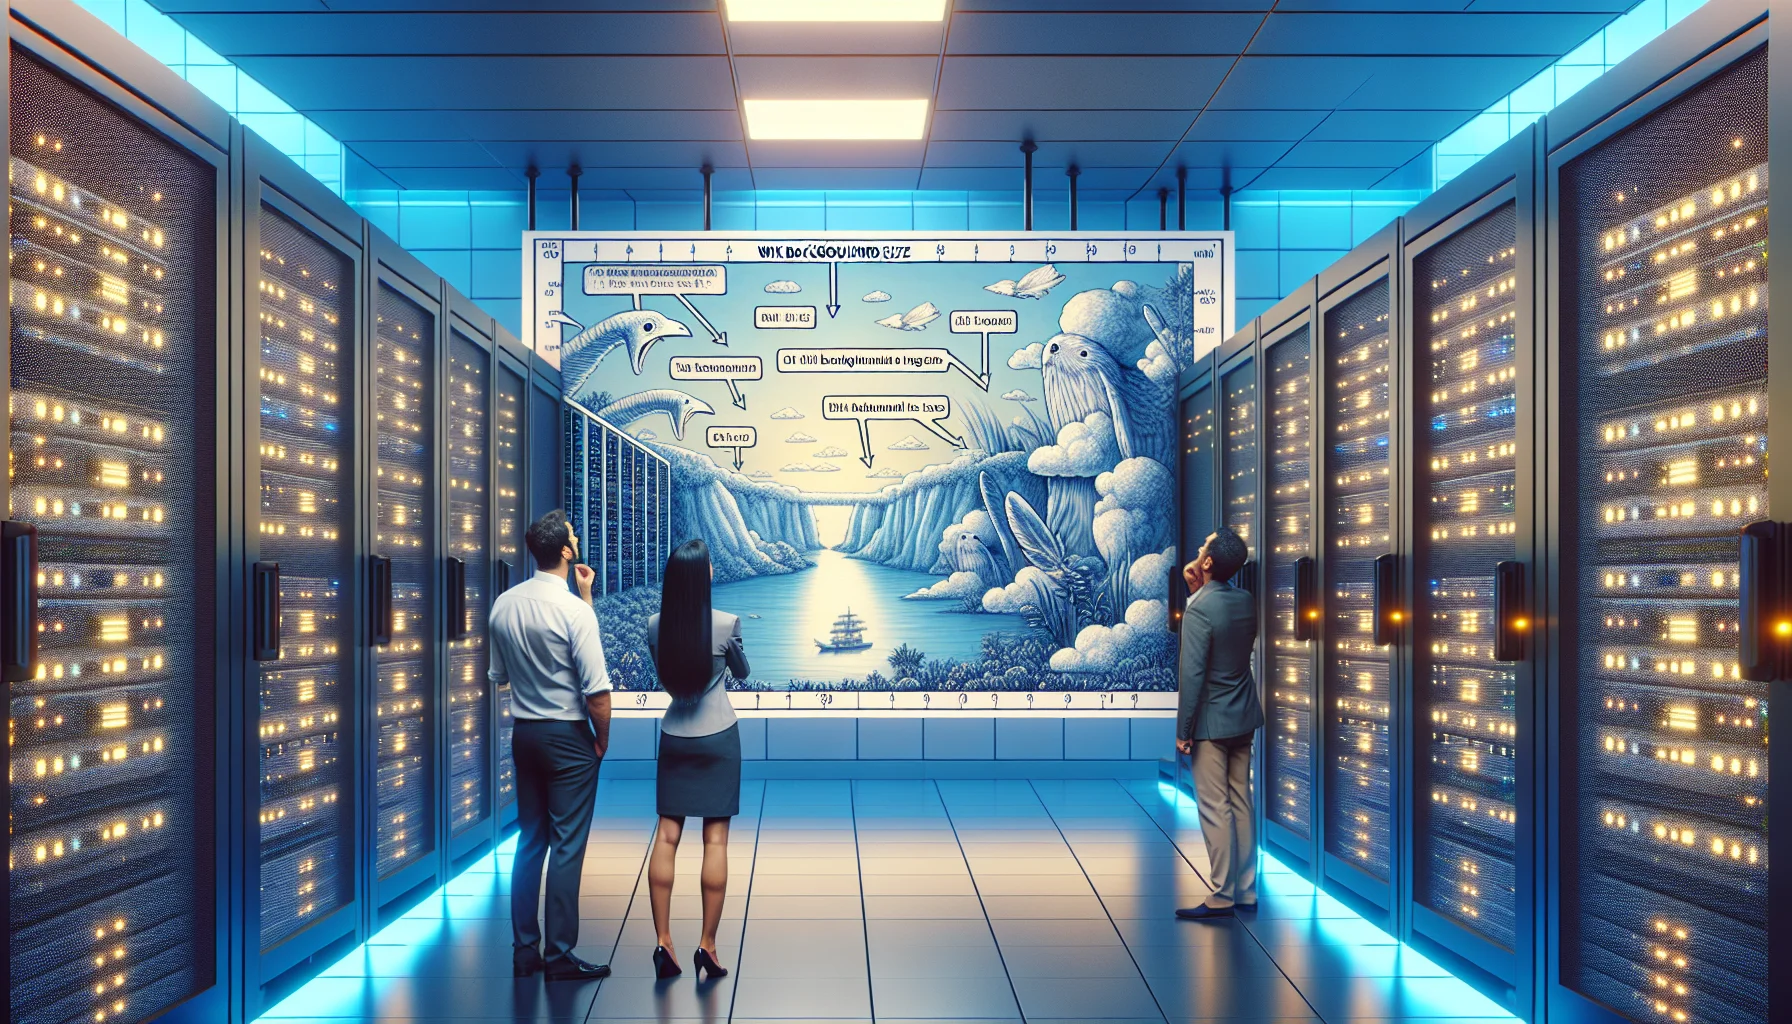 Create an image illustrating a humorous scenario related to web hosting. Display a comic relief event in a data center where servers are neatly stacked, blinking with various lights. The scene is lit by a pale blue, almost luminous hue. On the wall, instead of the usual technical schematics, there is an oversize surreal blueprint titled 'Wix Background Image Size'. The blueprint shows exaggerated dimensions and funny annotations, causing a couple of technicians, a Hispanic woman and a Middle-Eastern man, to laugh as they observe it. Their amusement adds an enticing atmosphere to the otherwise serious setting of the data center.